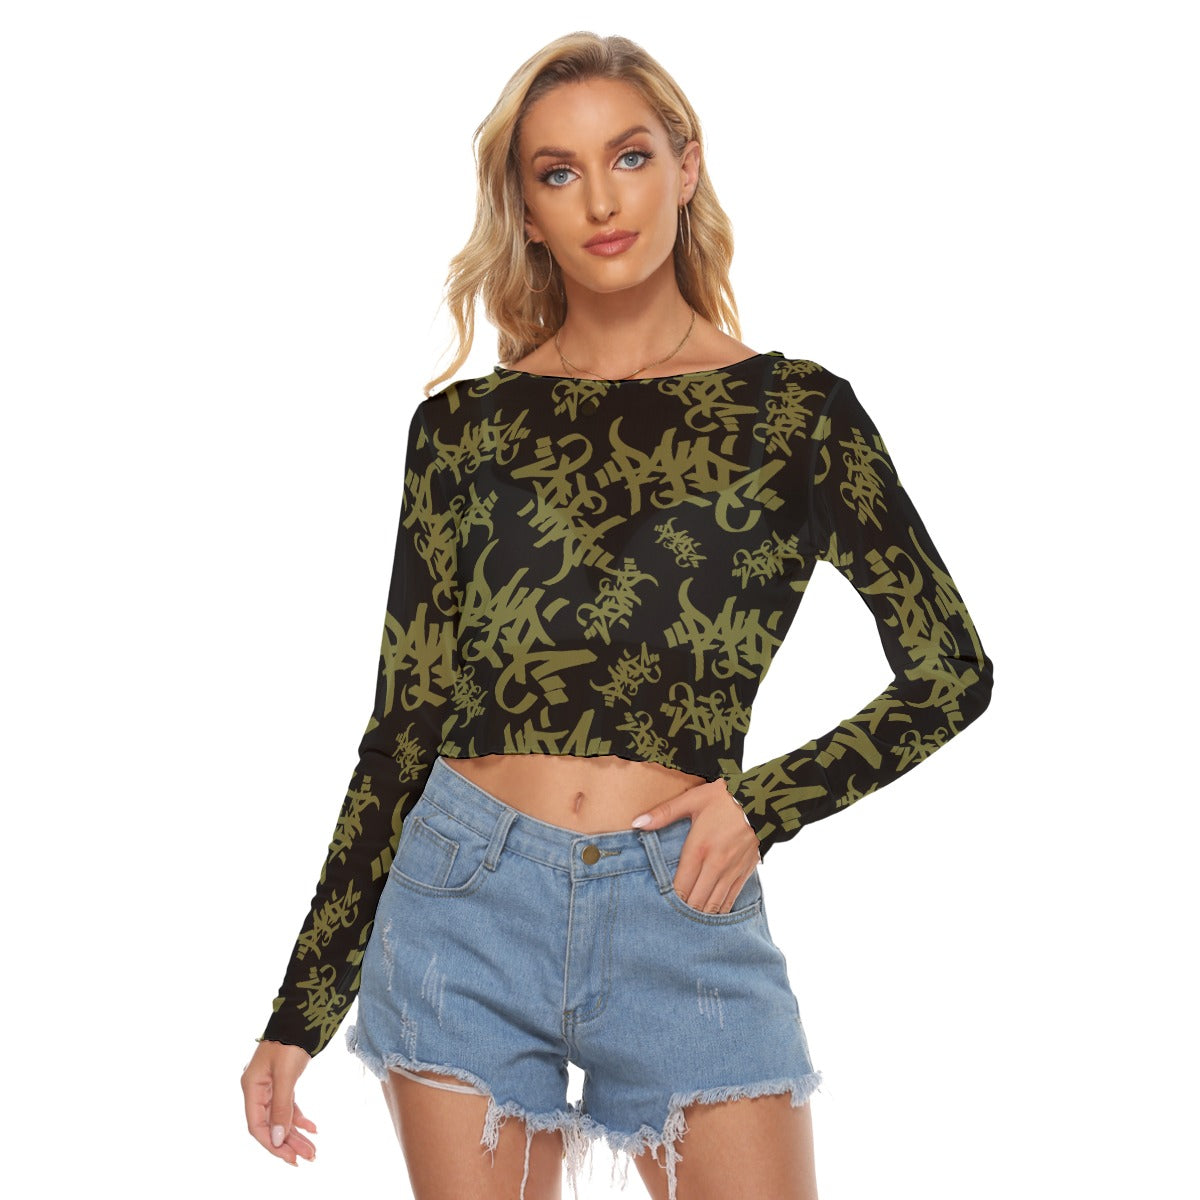 THE TAG MESH WOMENS CROP LONG SLEEVE TOP BLACK/OLIVE - Panic 39